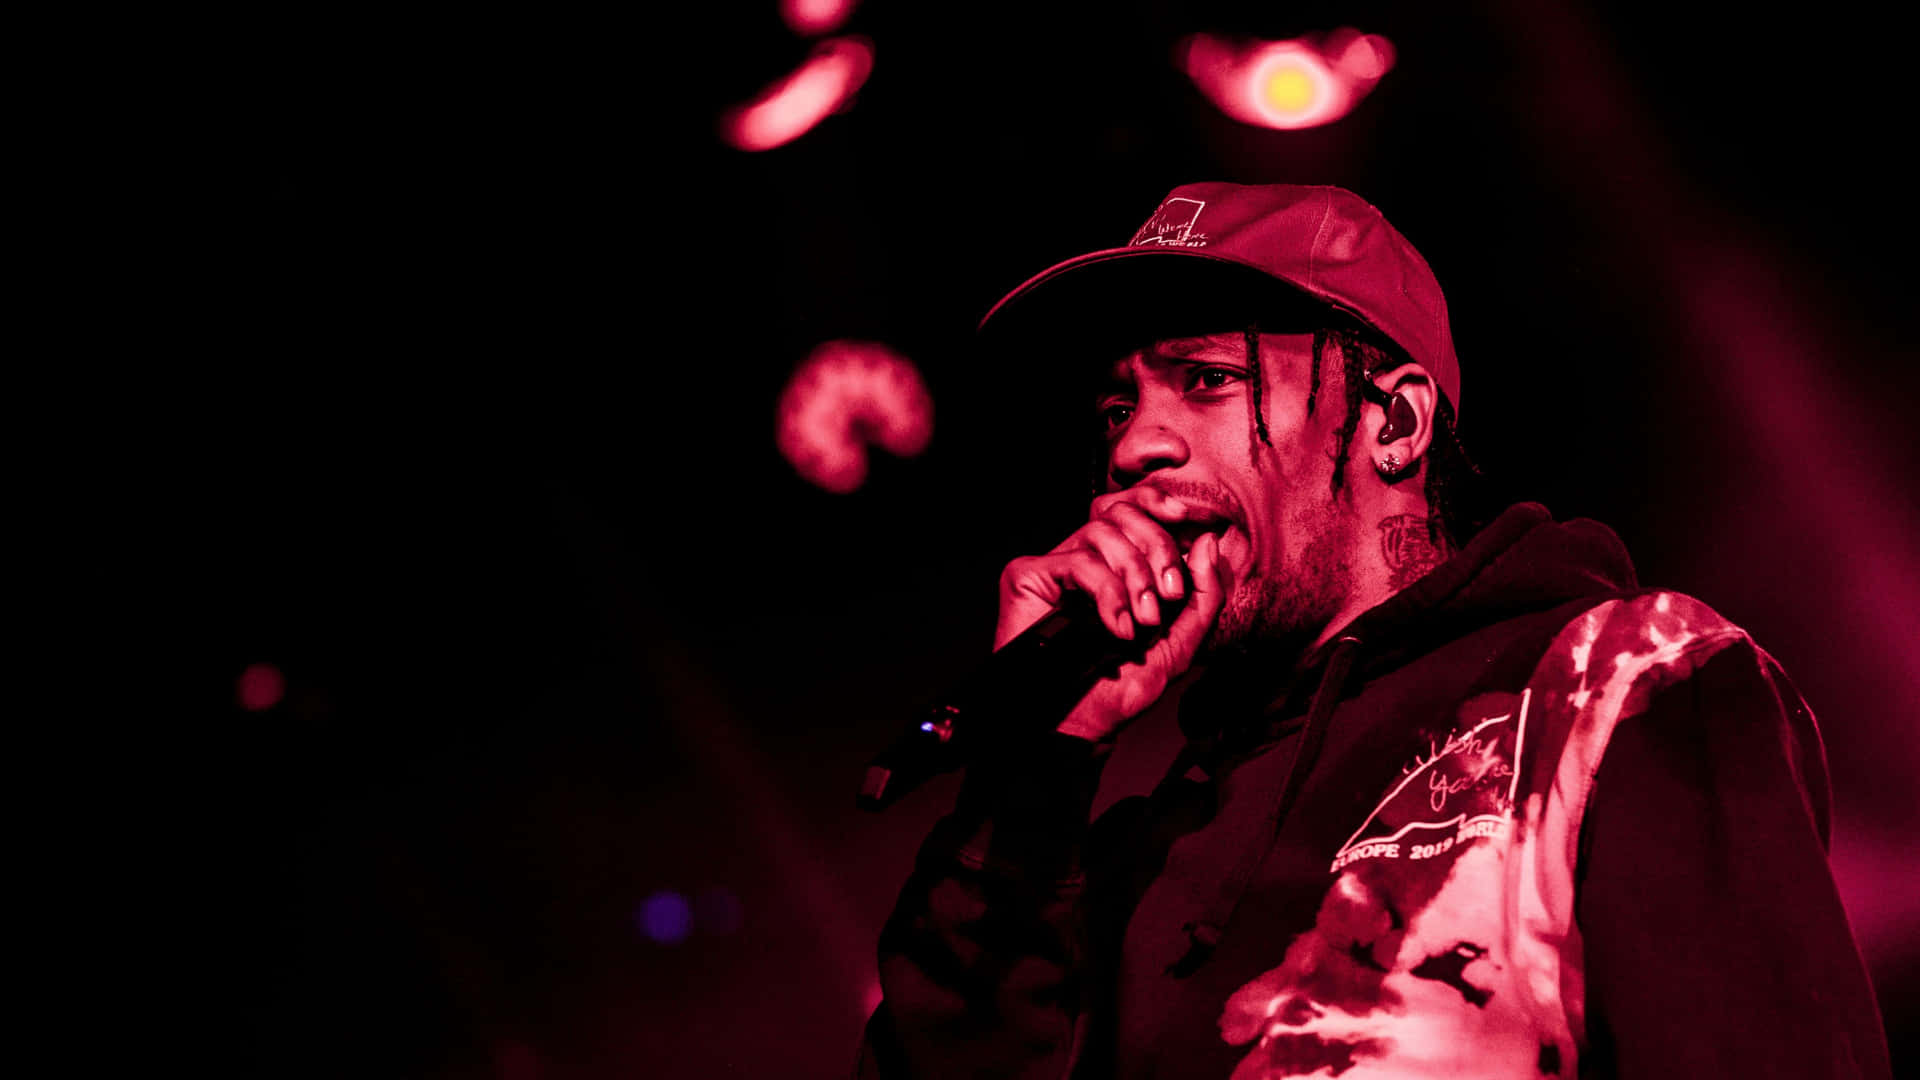 Get ready for an electrifying performance by Travis Scott at his upcoming concert! Wallpaper